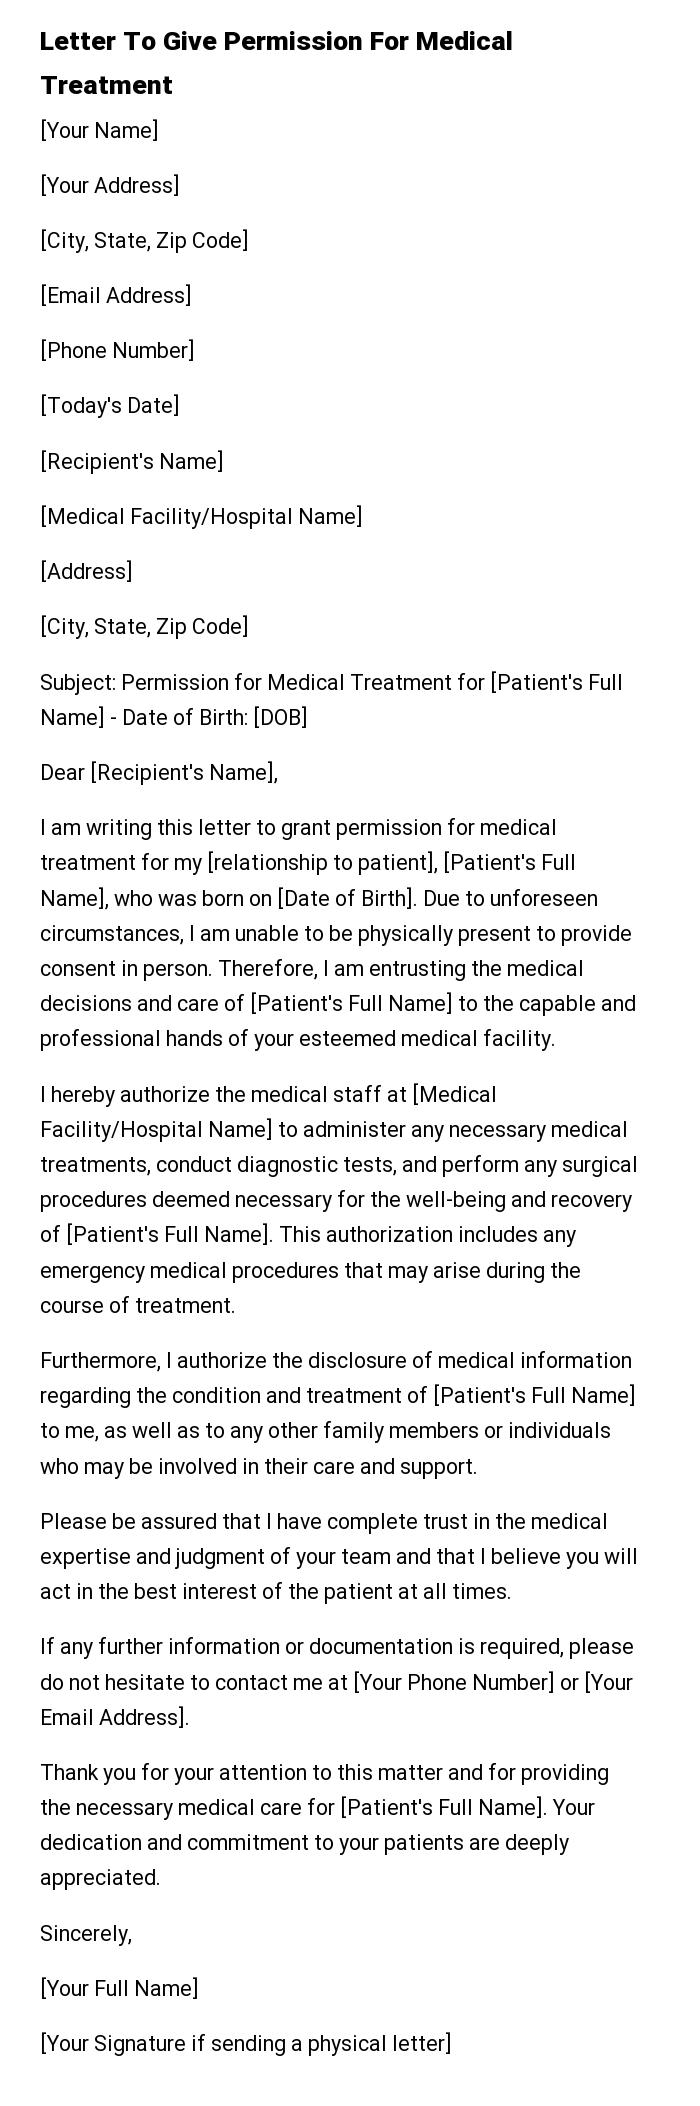 Letter To Give Permission For Medical Treatment